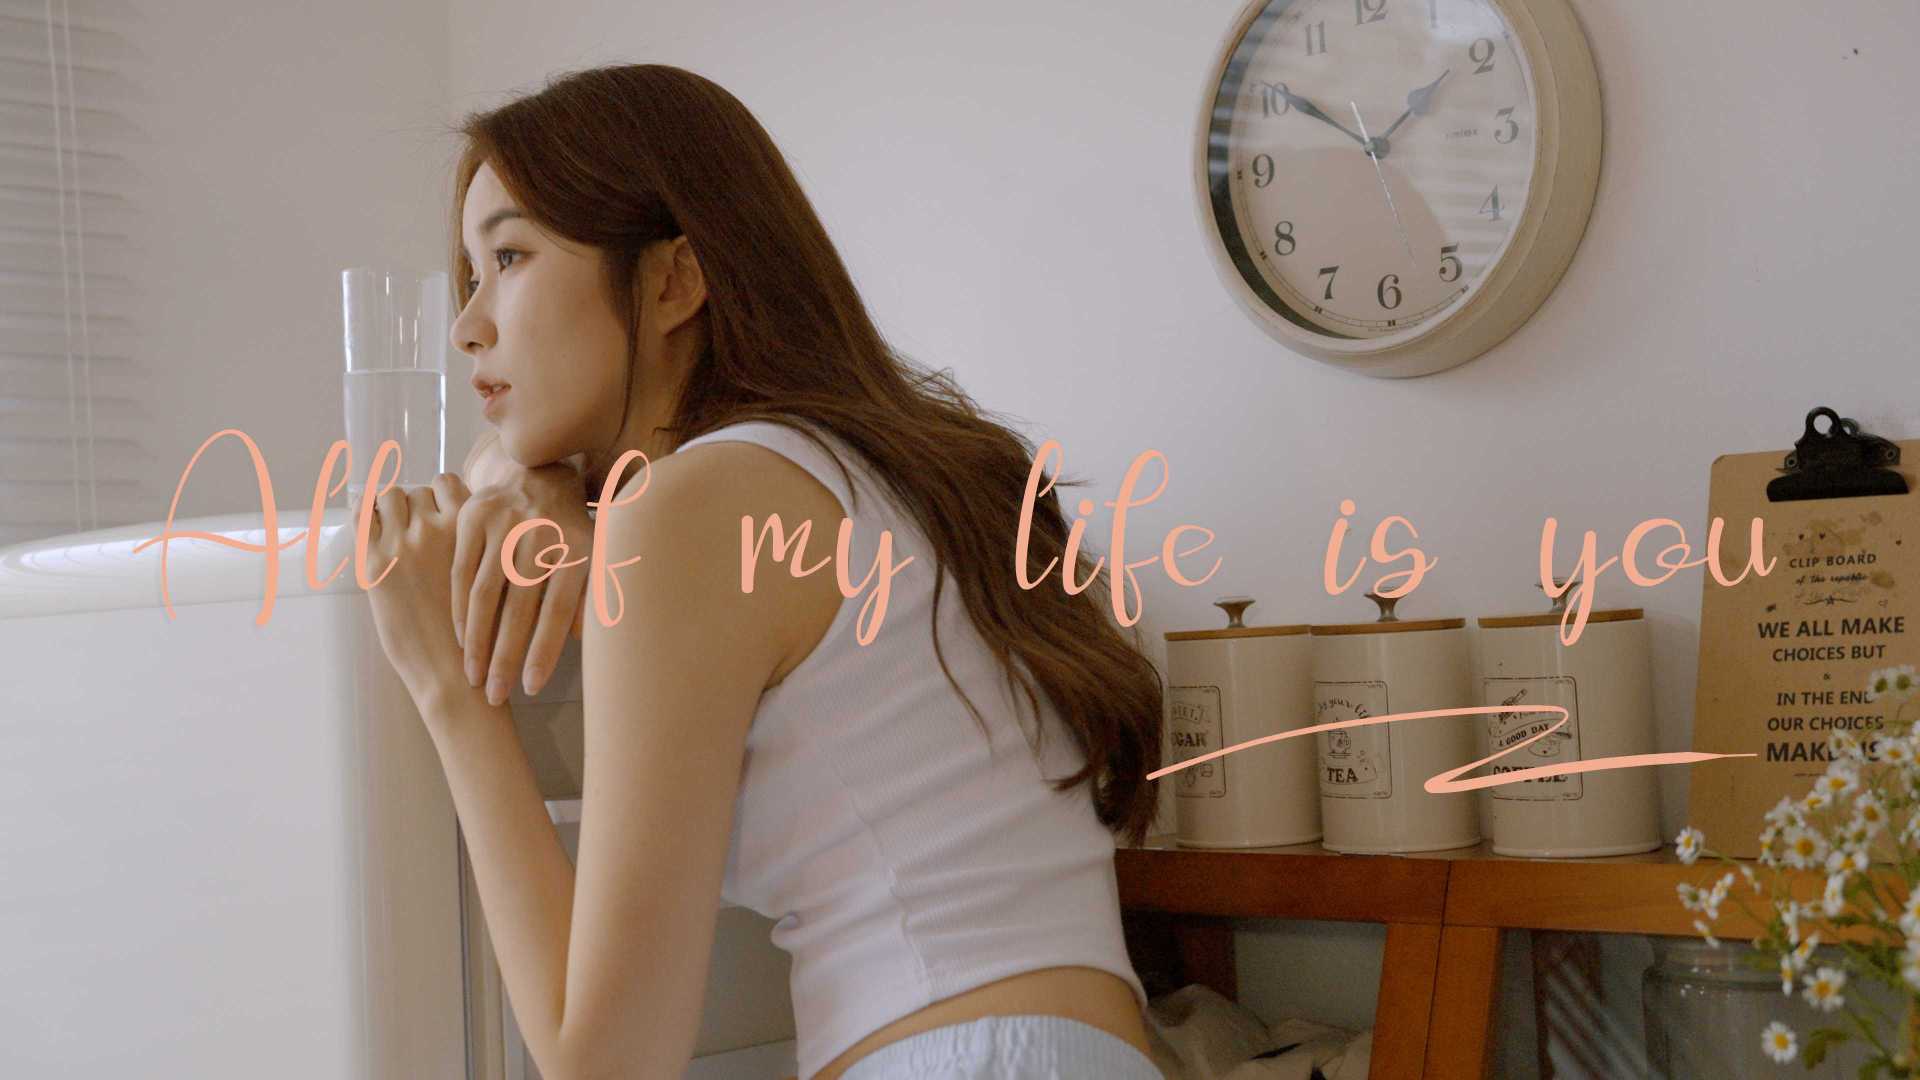 All of my life is you | 韩系文艺短片